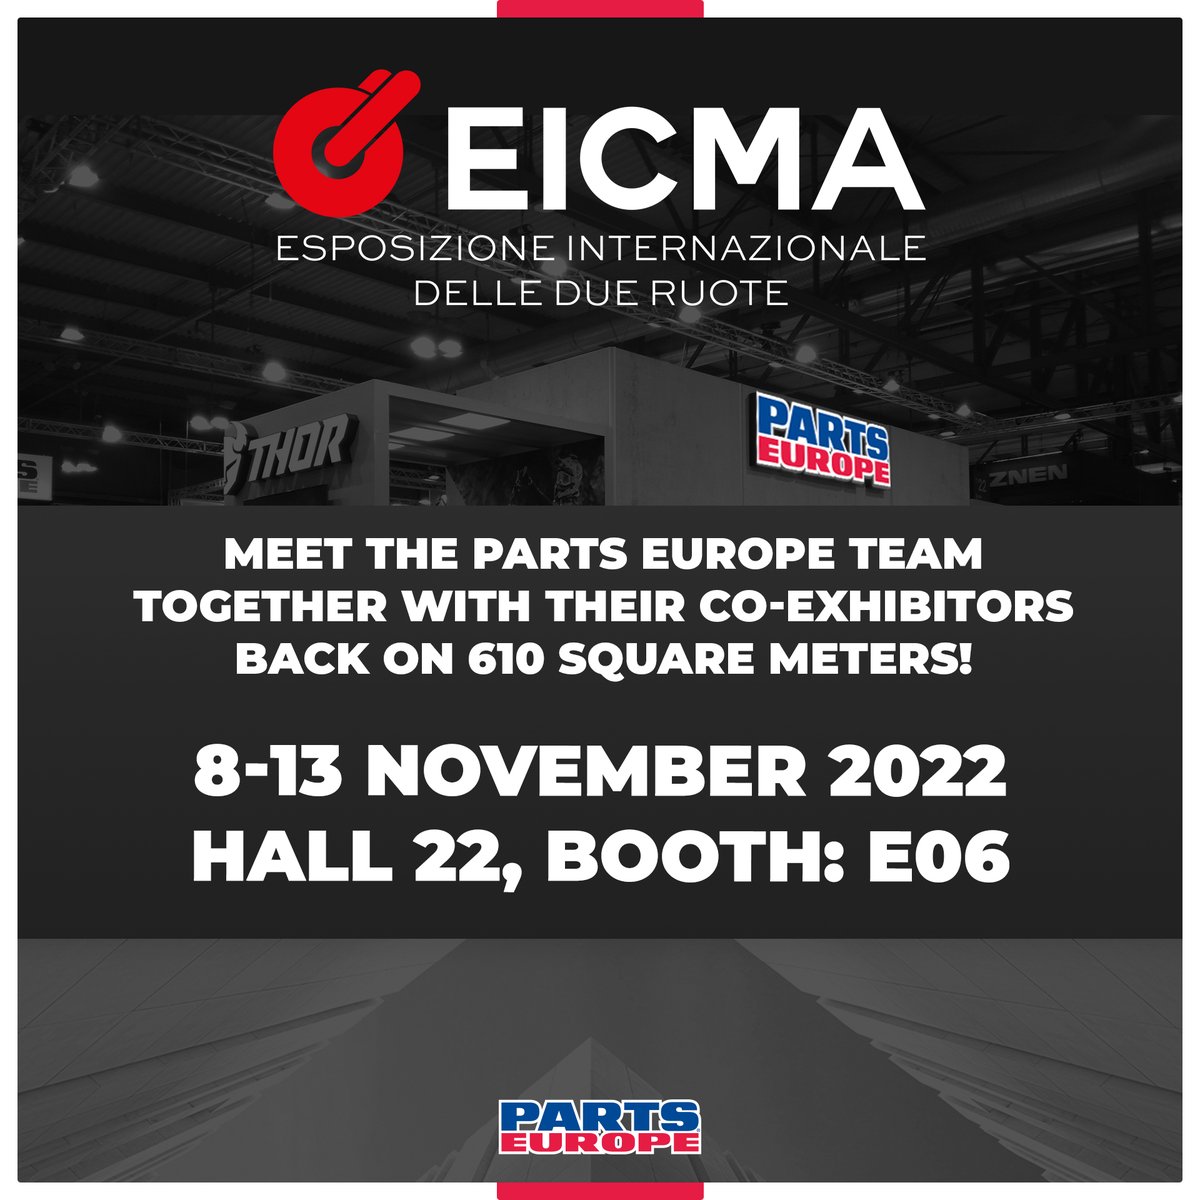 EICMA 2022 is coming and the PARTS EUROPE Team will be in Milan, too! 🔥

More info: partseurope.eu/it/page/eicma-… 

#ECIMA #MotoLive #wesupportthesport #partseurope